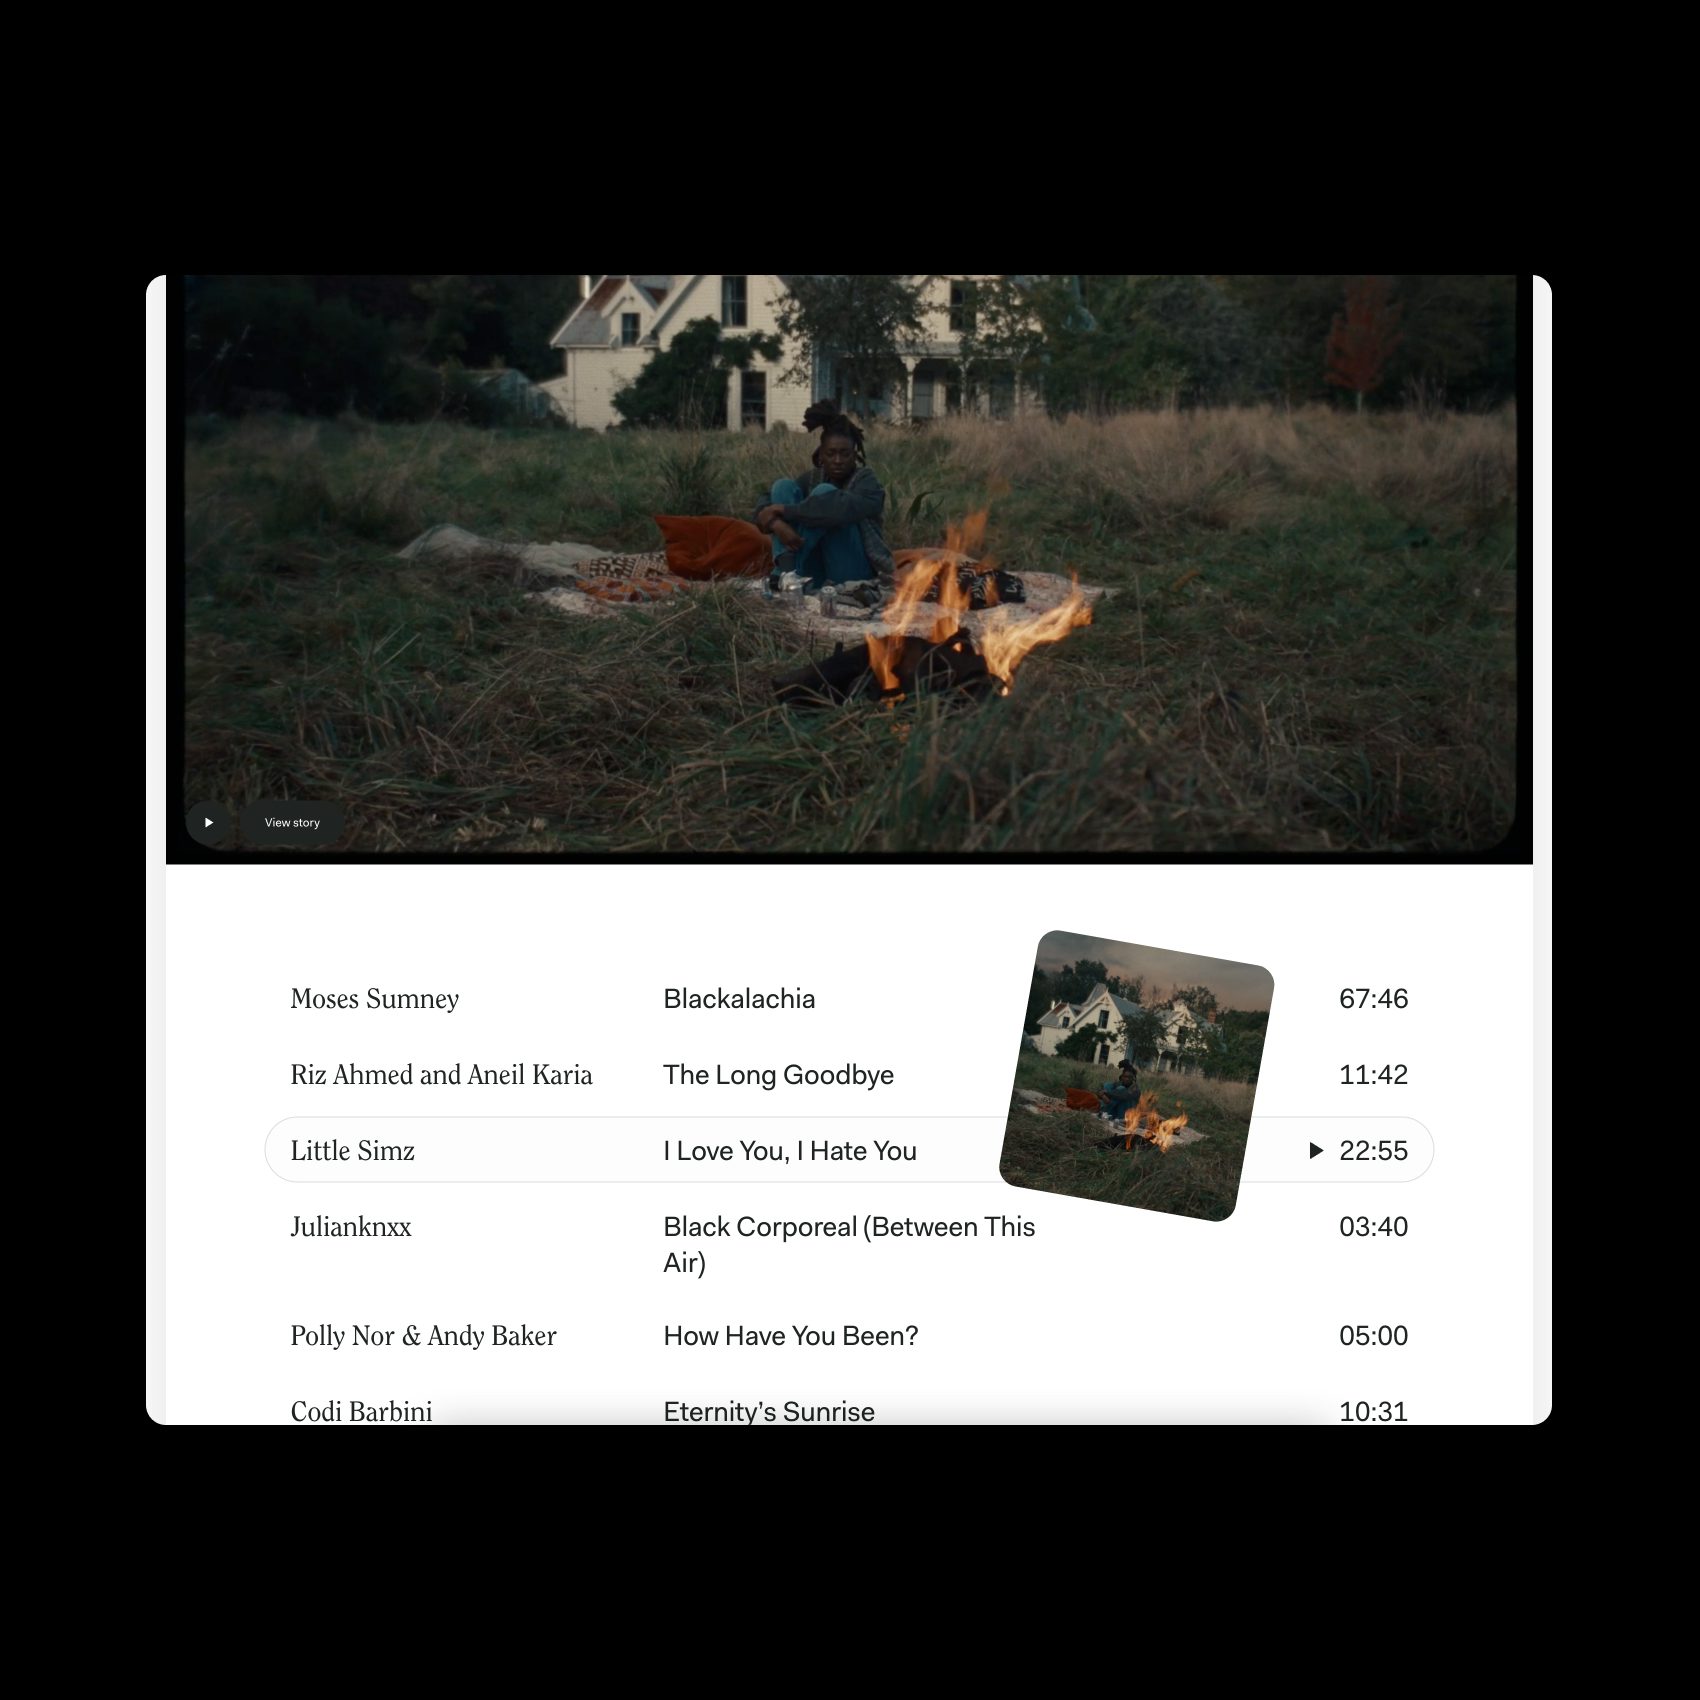 Image of film watch list as part of the WePresent WeTransfer redesign